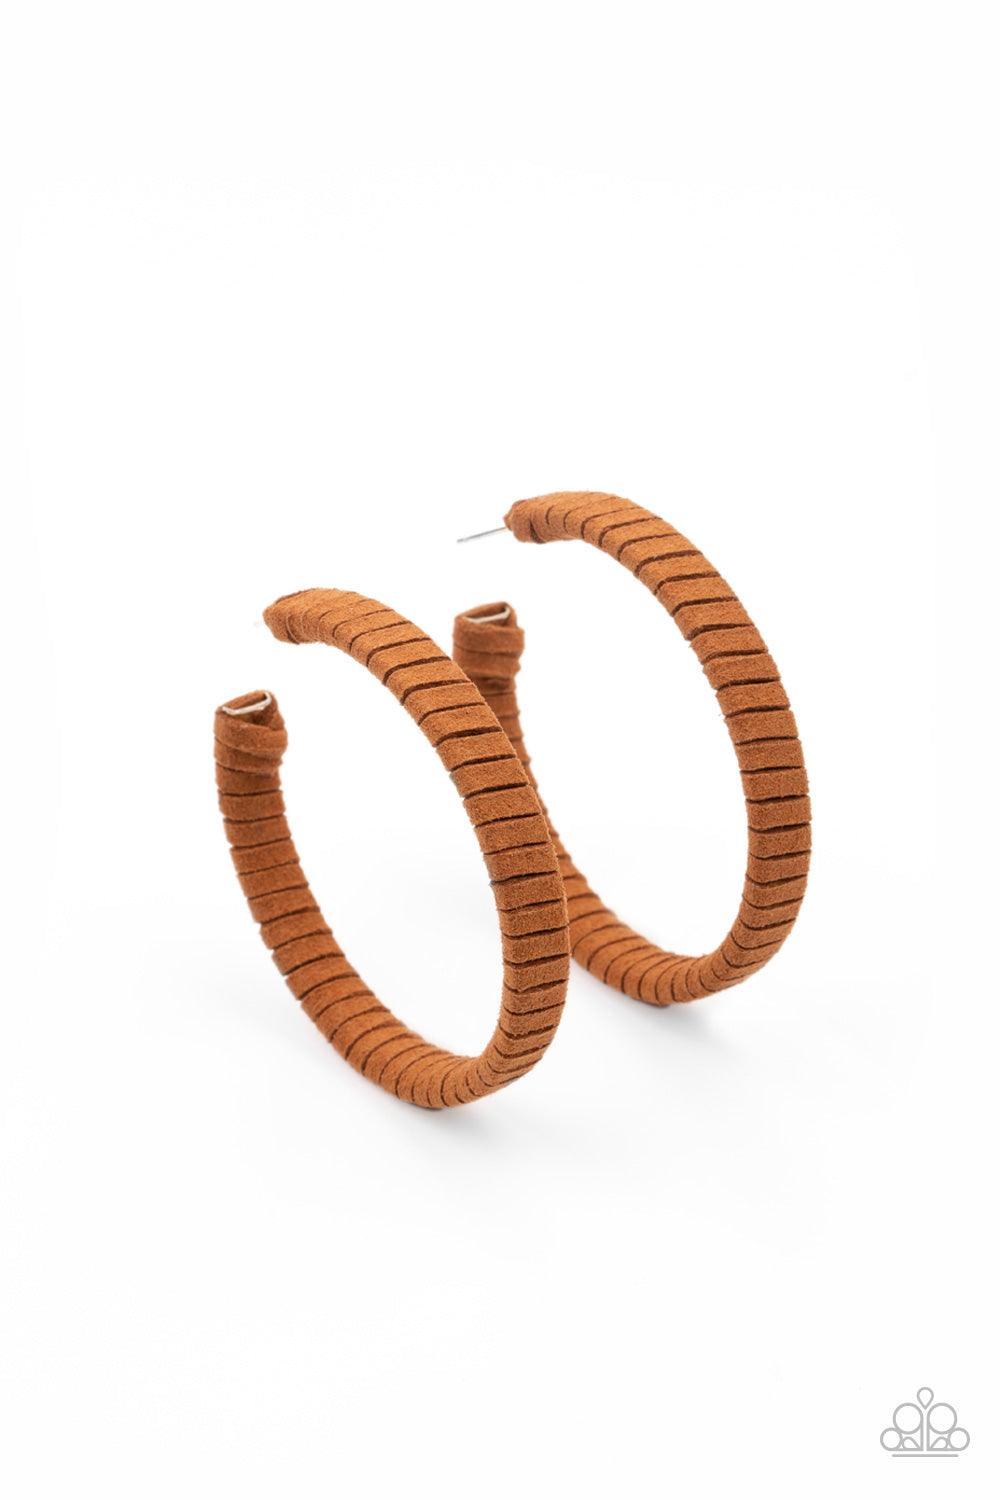 Paparazzi Accessories Suede Parade - Brown Tan suede cording wraps around an oversized hoop, creating an earthy pop of color. Earring attaches to a standard post fitting. Hoop measures approximately 2 1/4" in diameter. Sold as one pair of hoop earrings. J